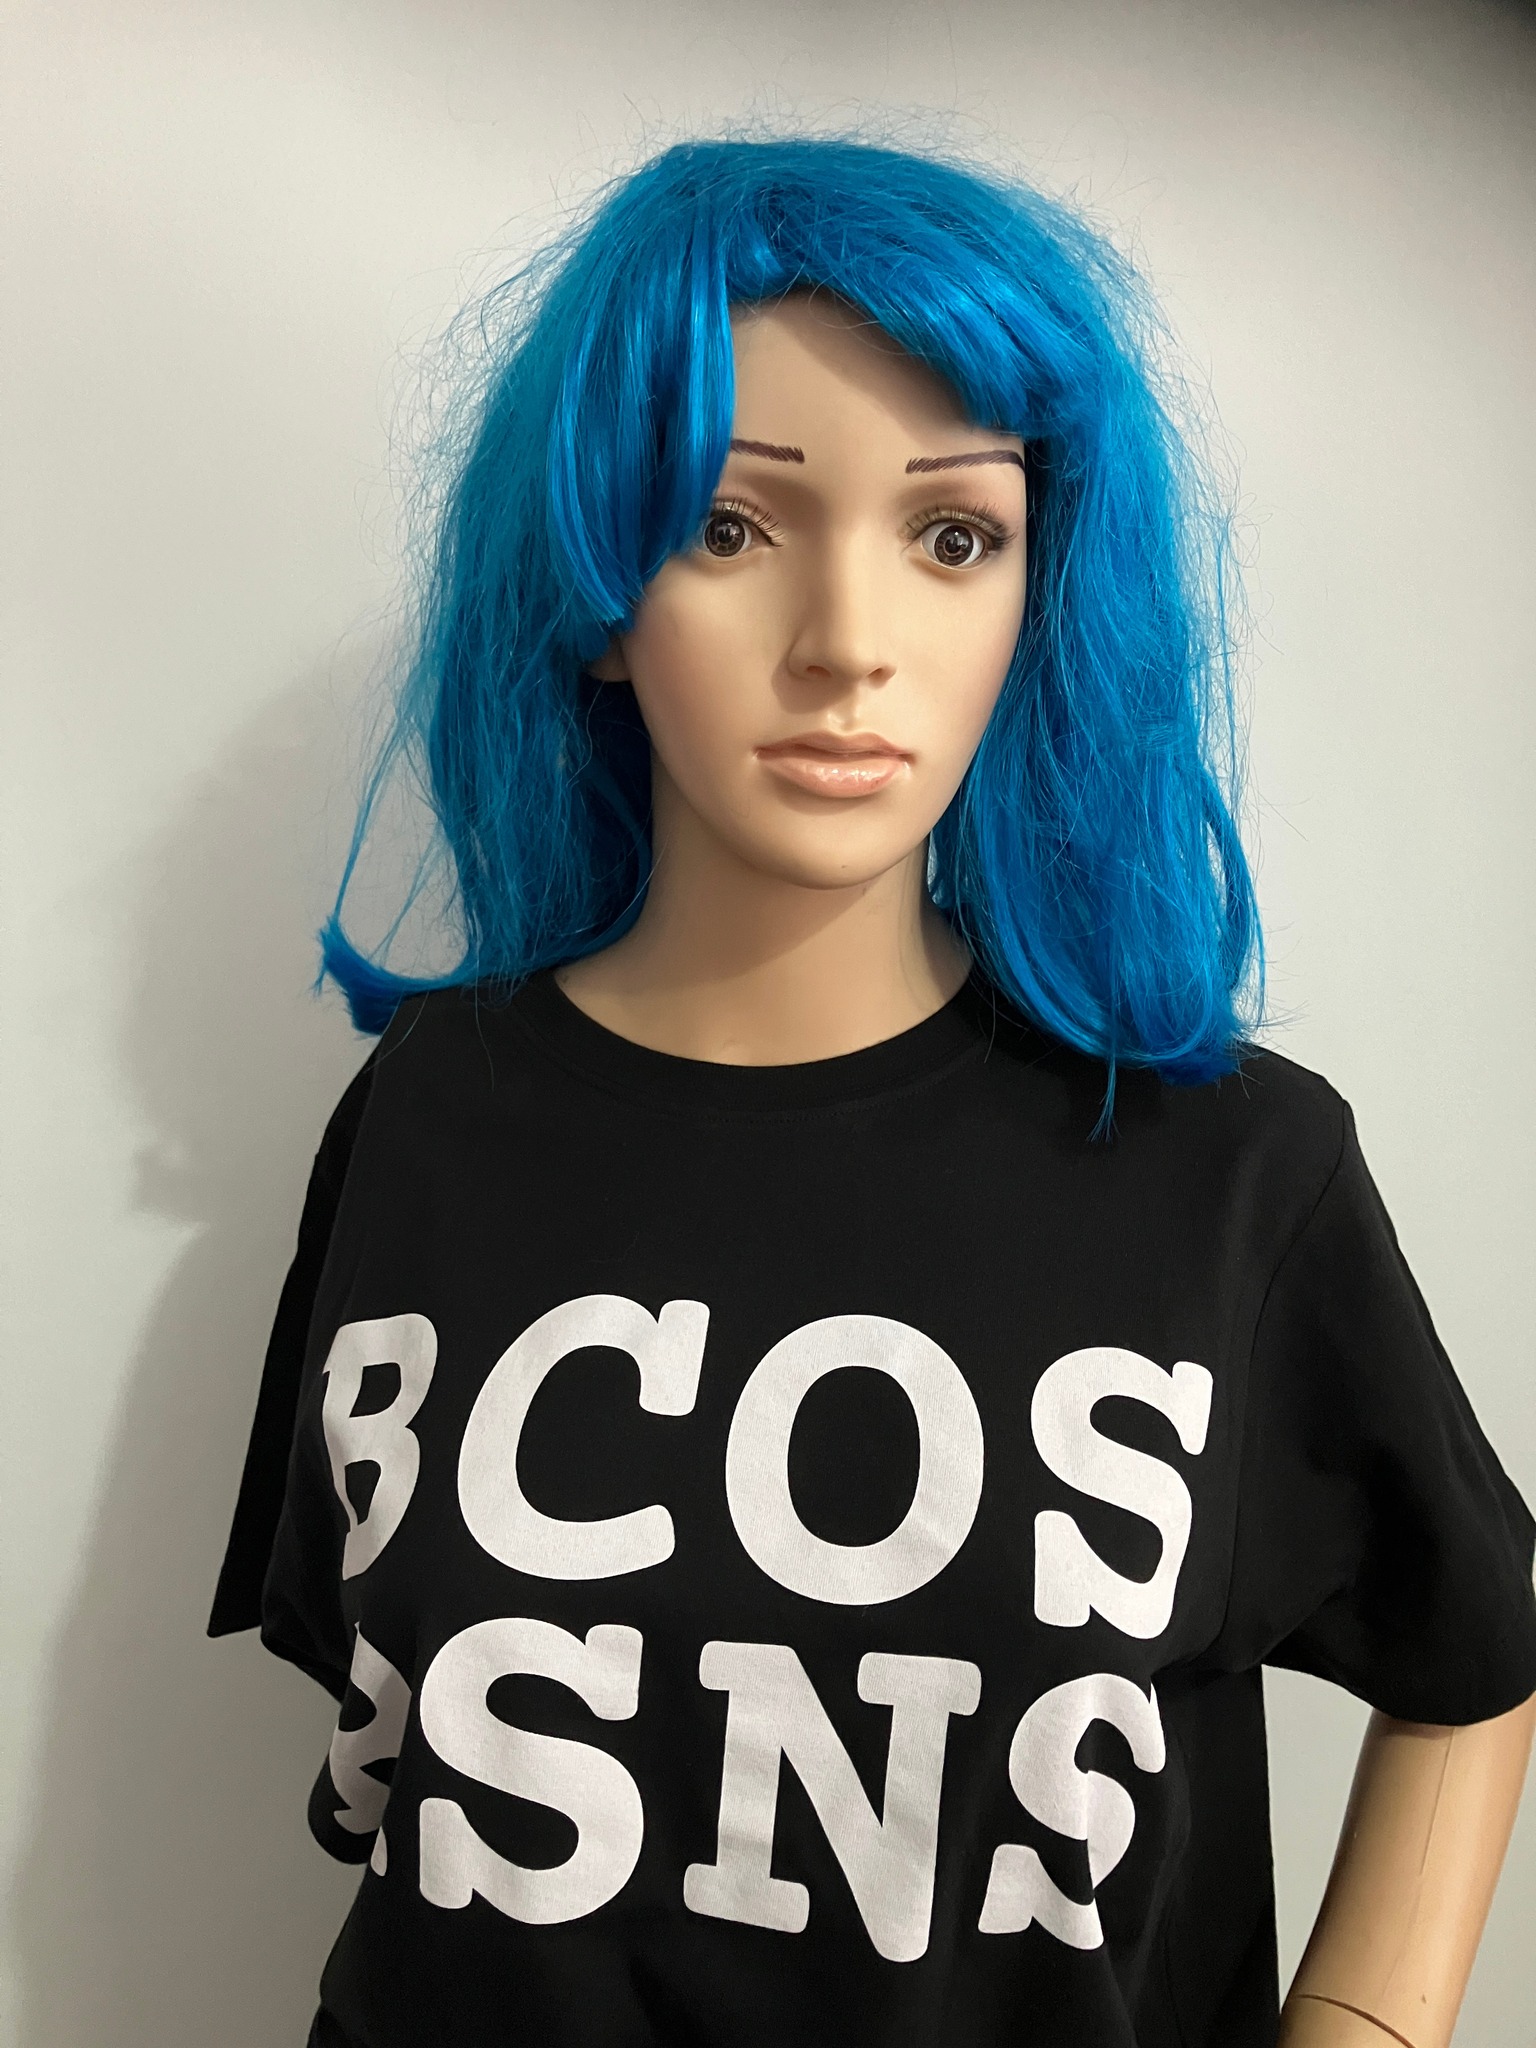 A mannequin wearing a white-on-black BCOS RSNS logo t-shirt